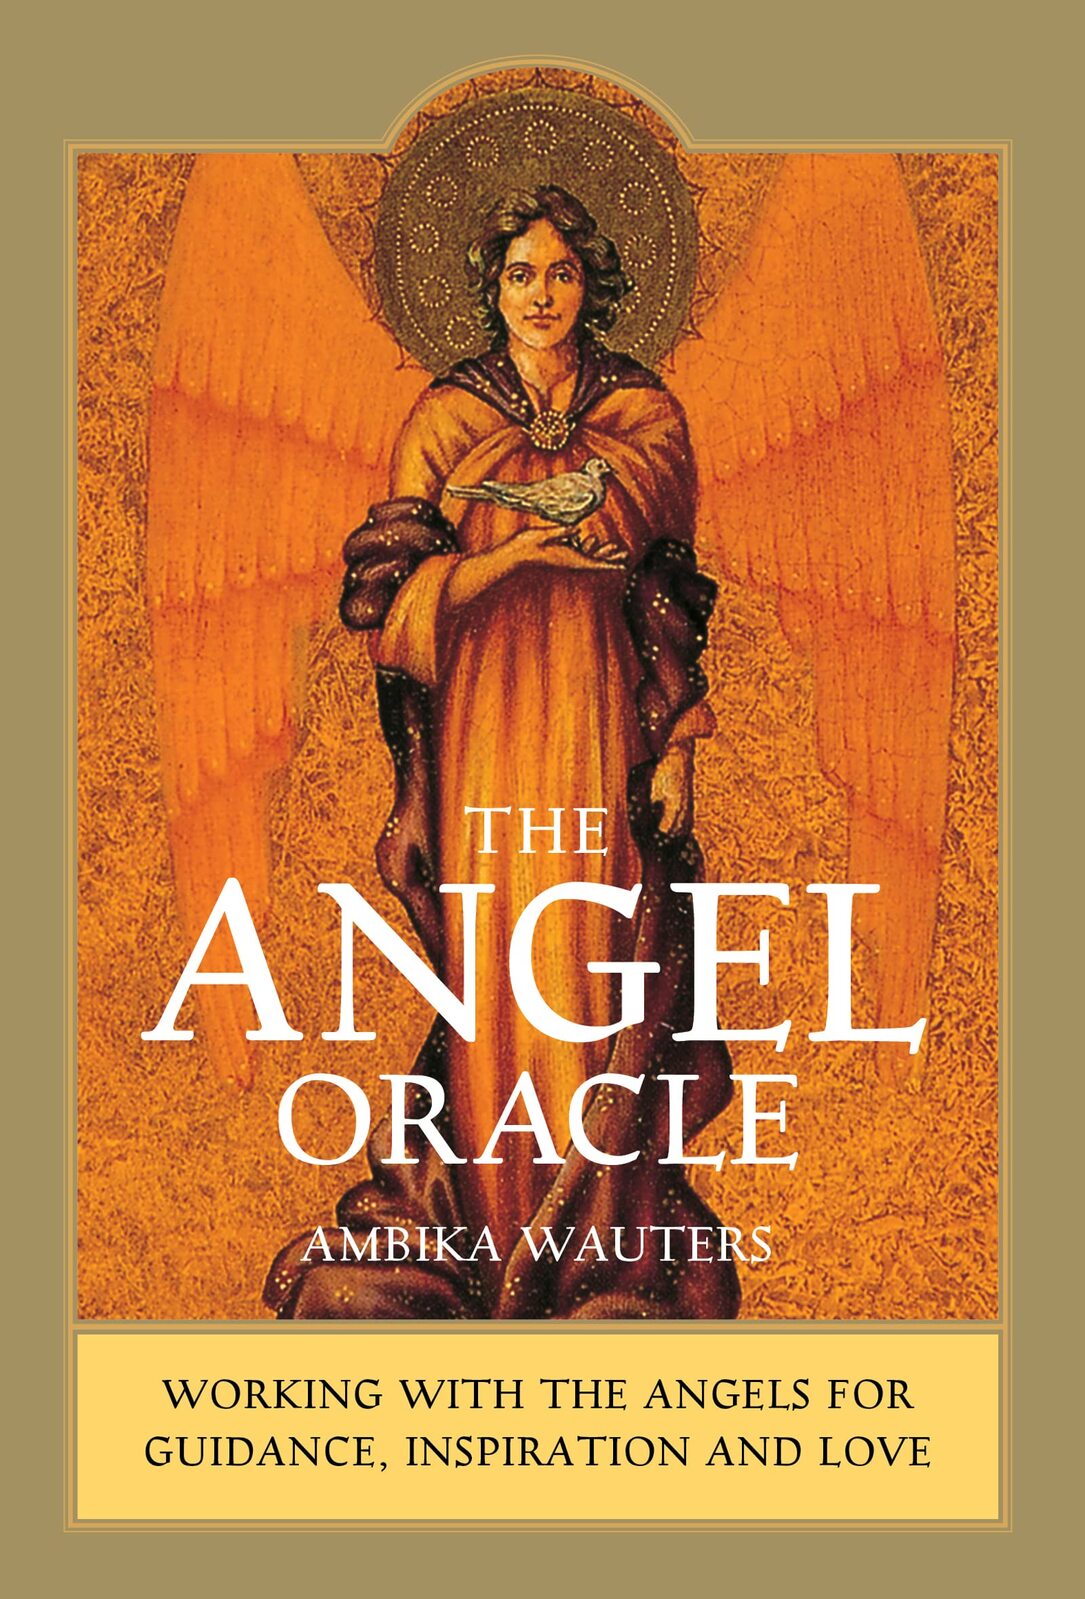 Angel Oracle Author : Ambika Wauters